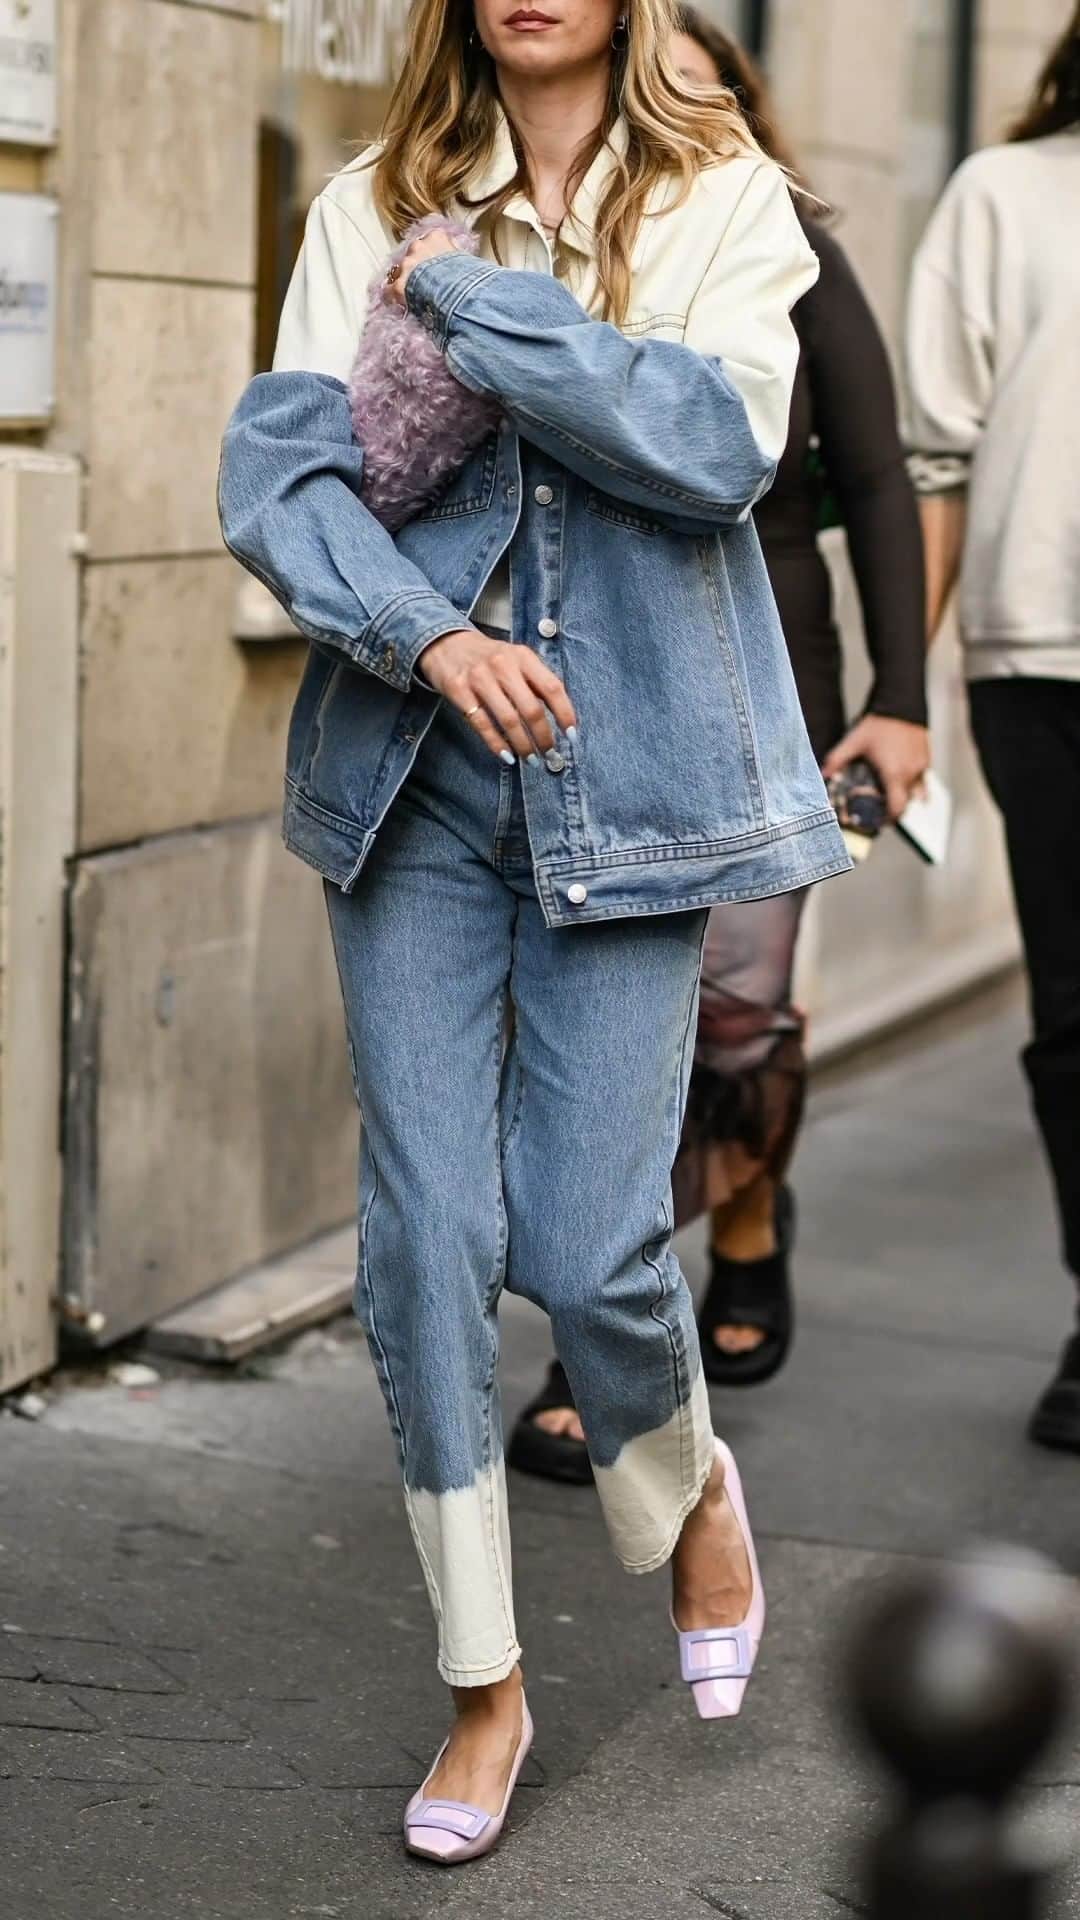 ShopBAZAARのインスタグラム：「All eyes on Paris as it closes Fashion Month. The street style stars dressed to impress with a preppy chic flair, sequin Barbiecore picks, and elevated denim looks. Shop the link in our bio for the must-haves of the new season for your autumnal wardrobe refresh.」